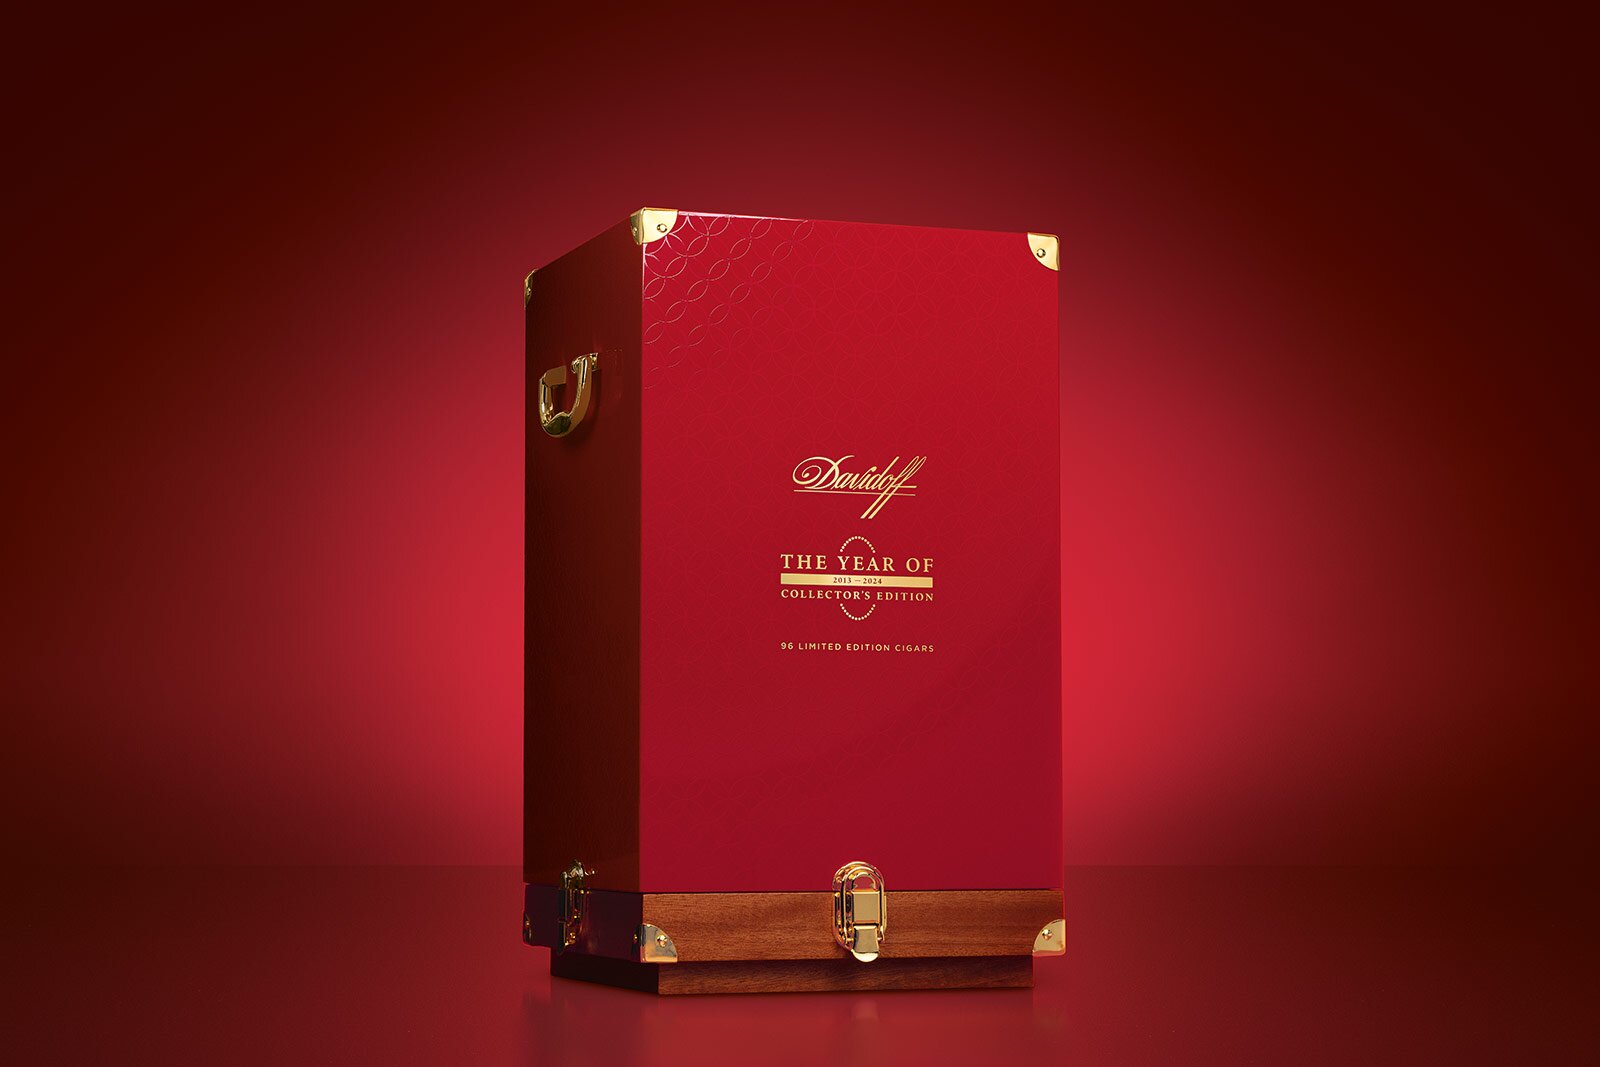 The closed red cabinet of the Davidoff The Year of Collector’s Edition.